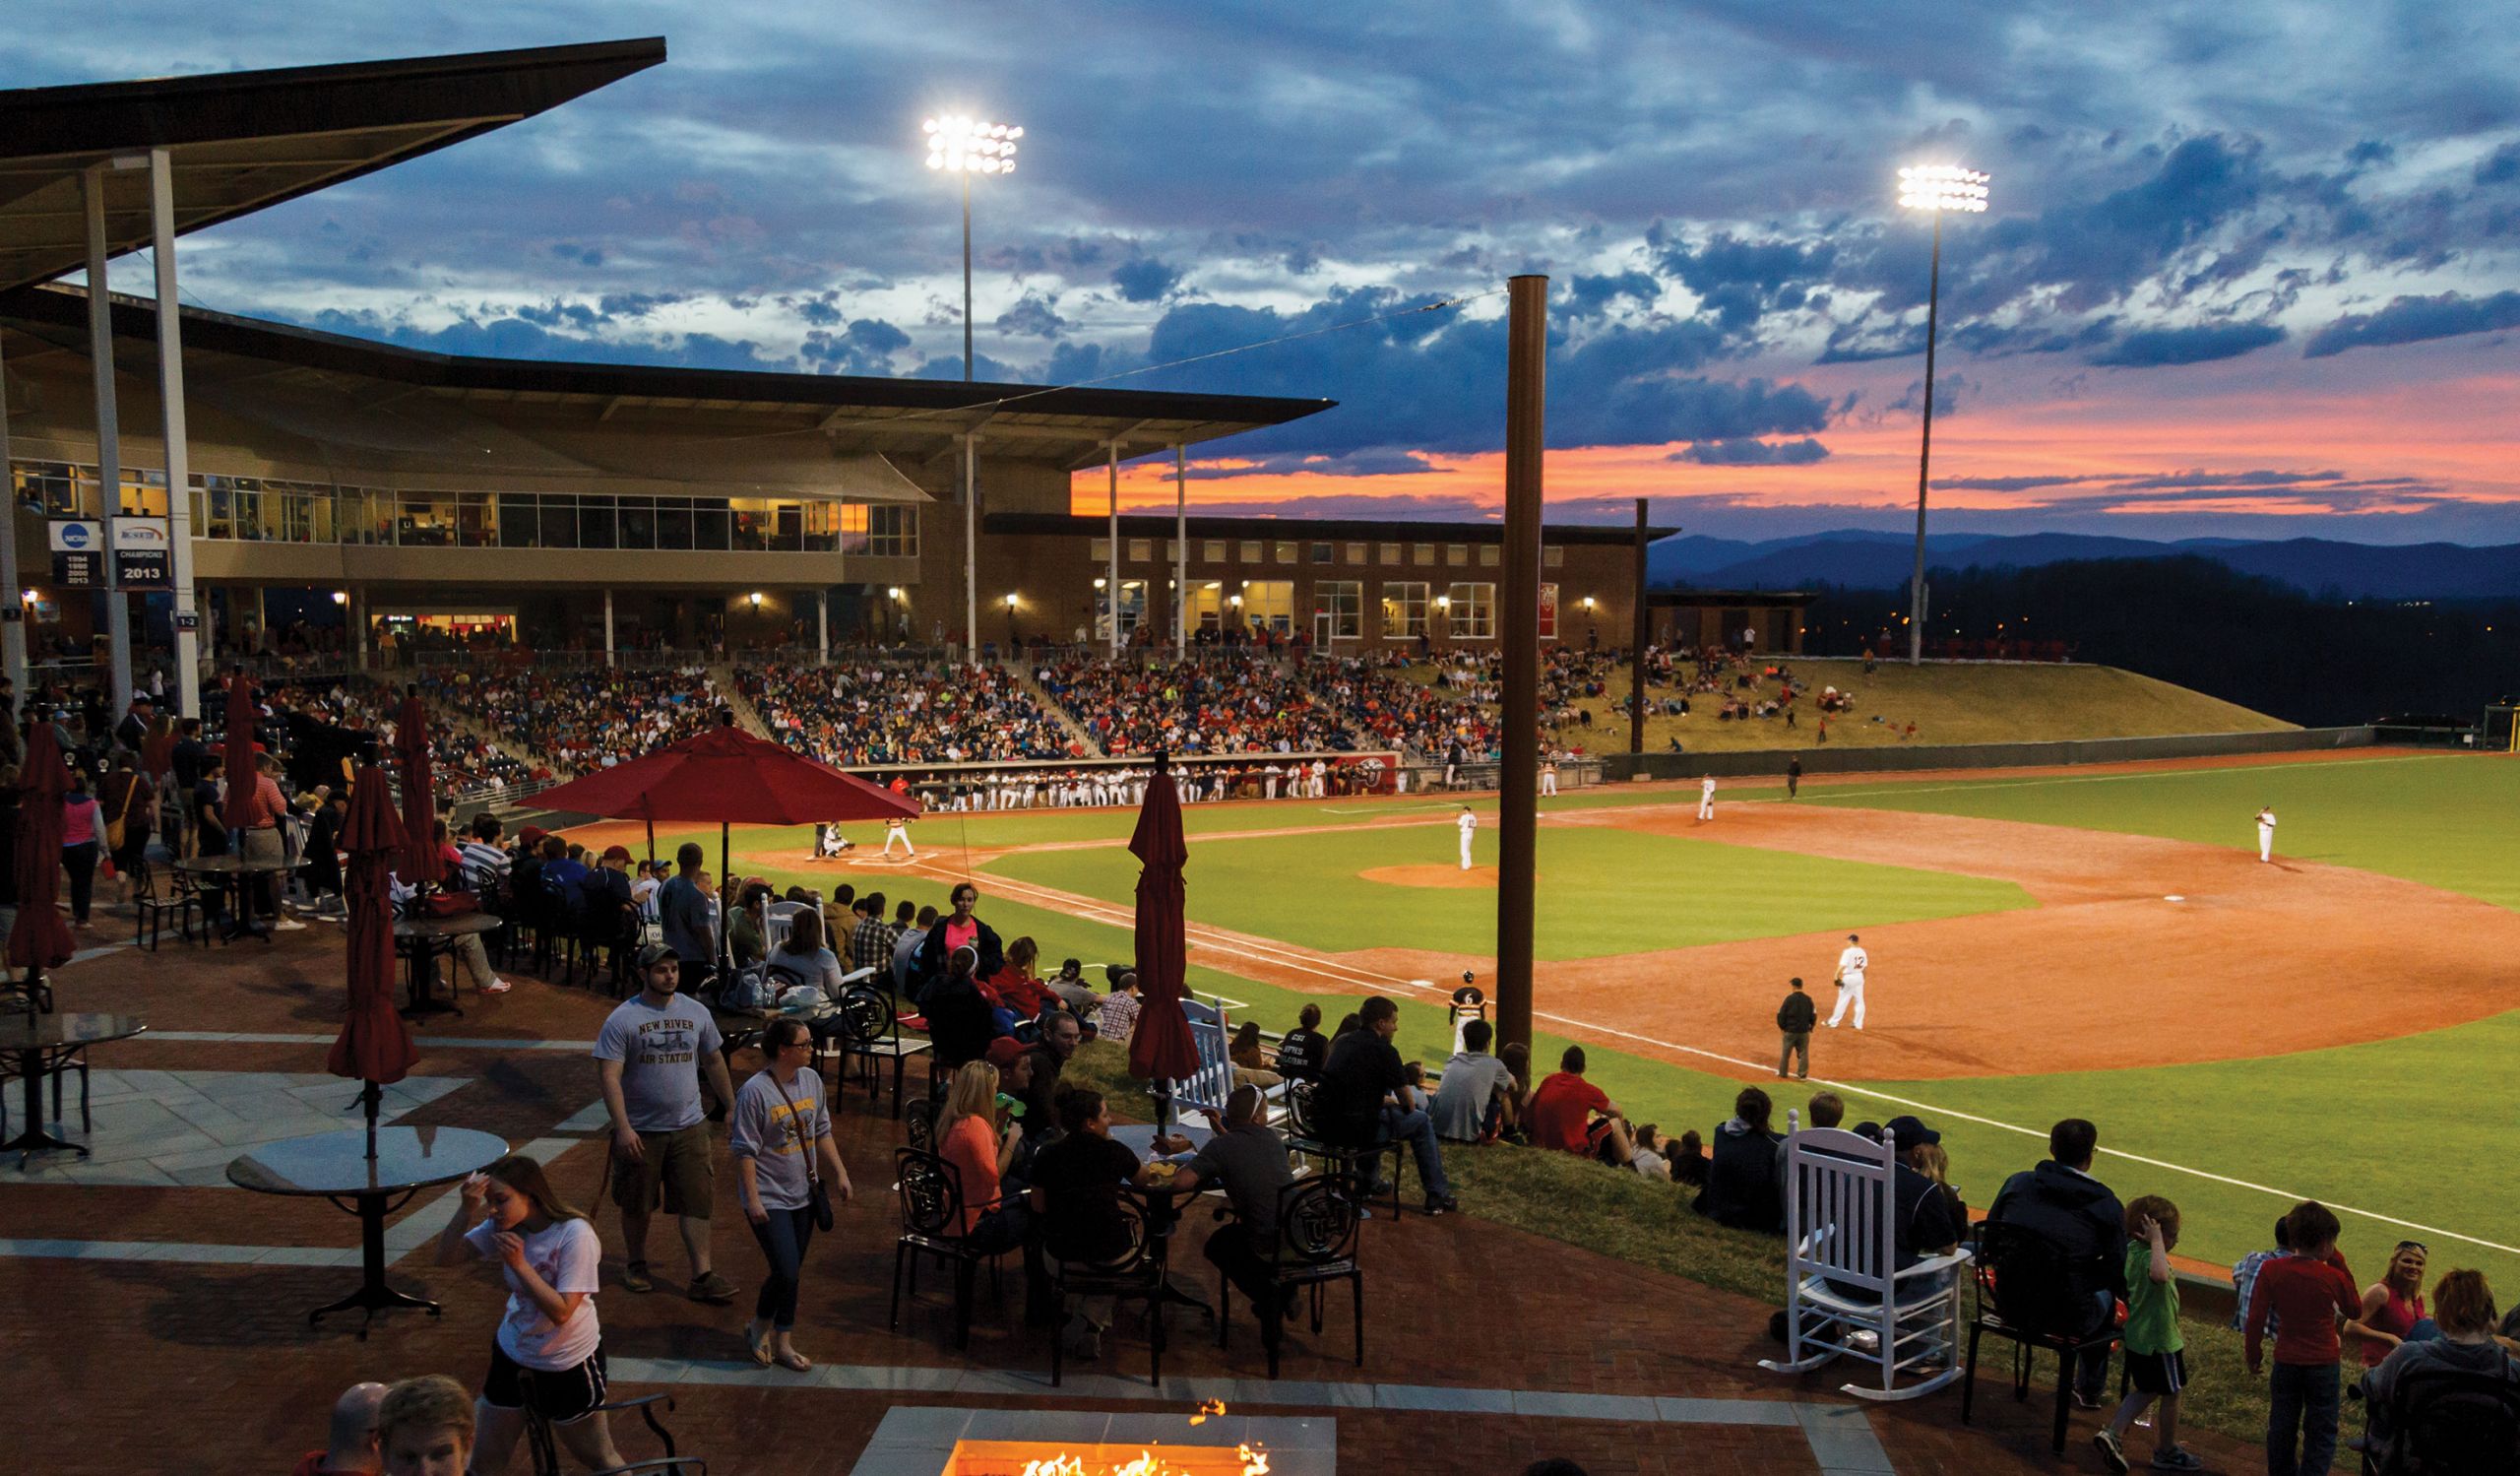 Liberty Baseball Stadium, home of Flames Baseball, was recently ranked No. 5 in best college ballpark experiences of 2014 by the Stadium Journey website.